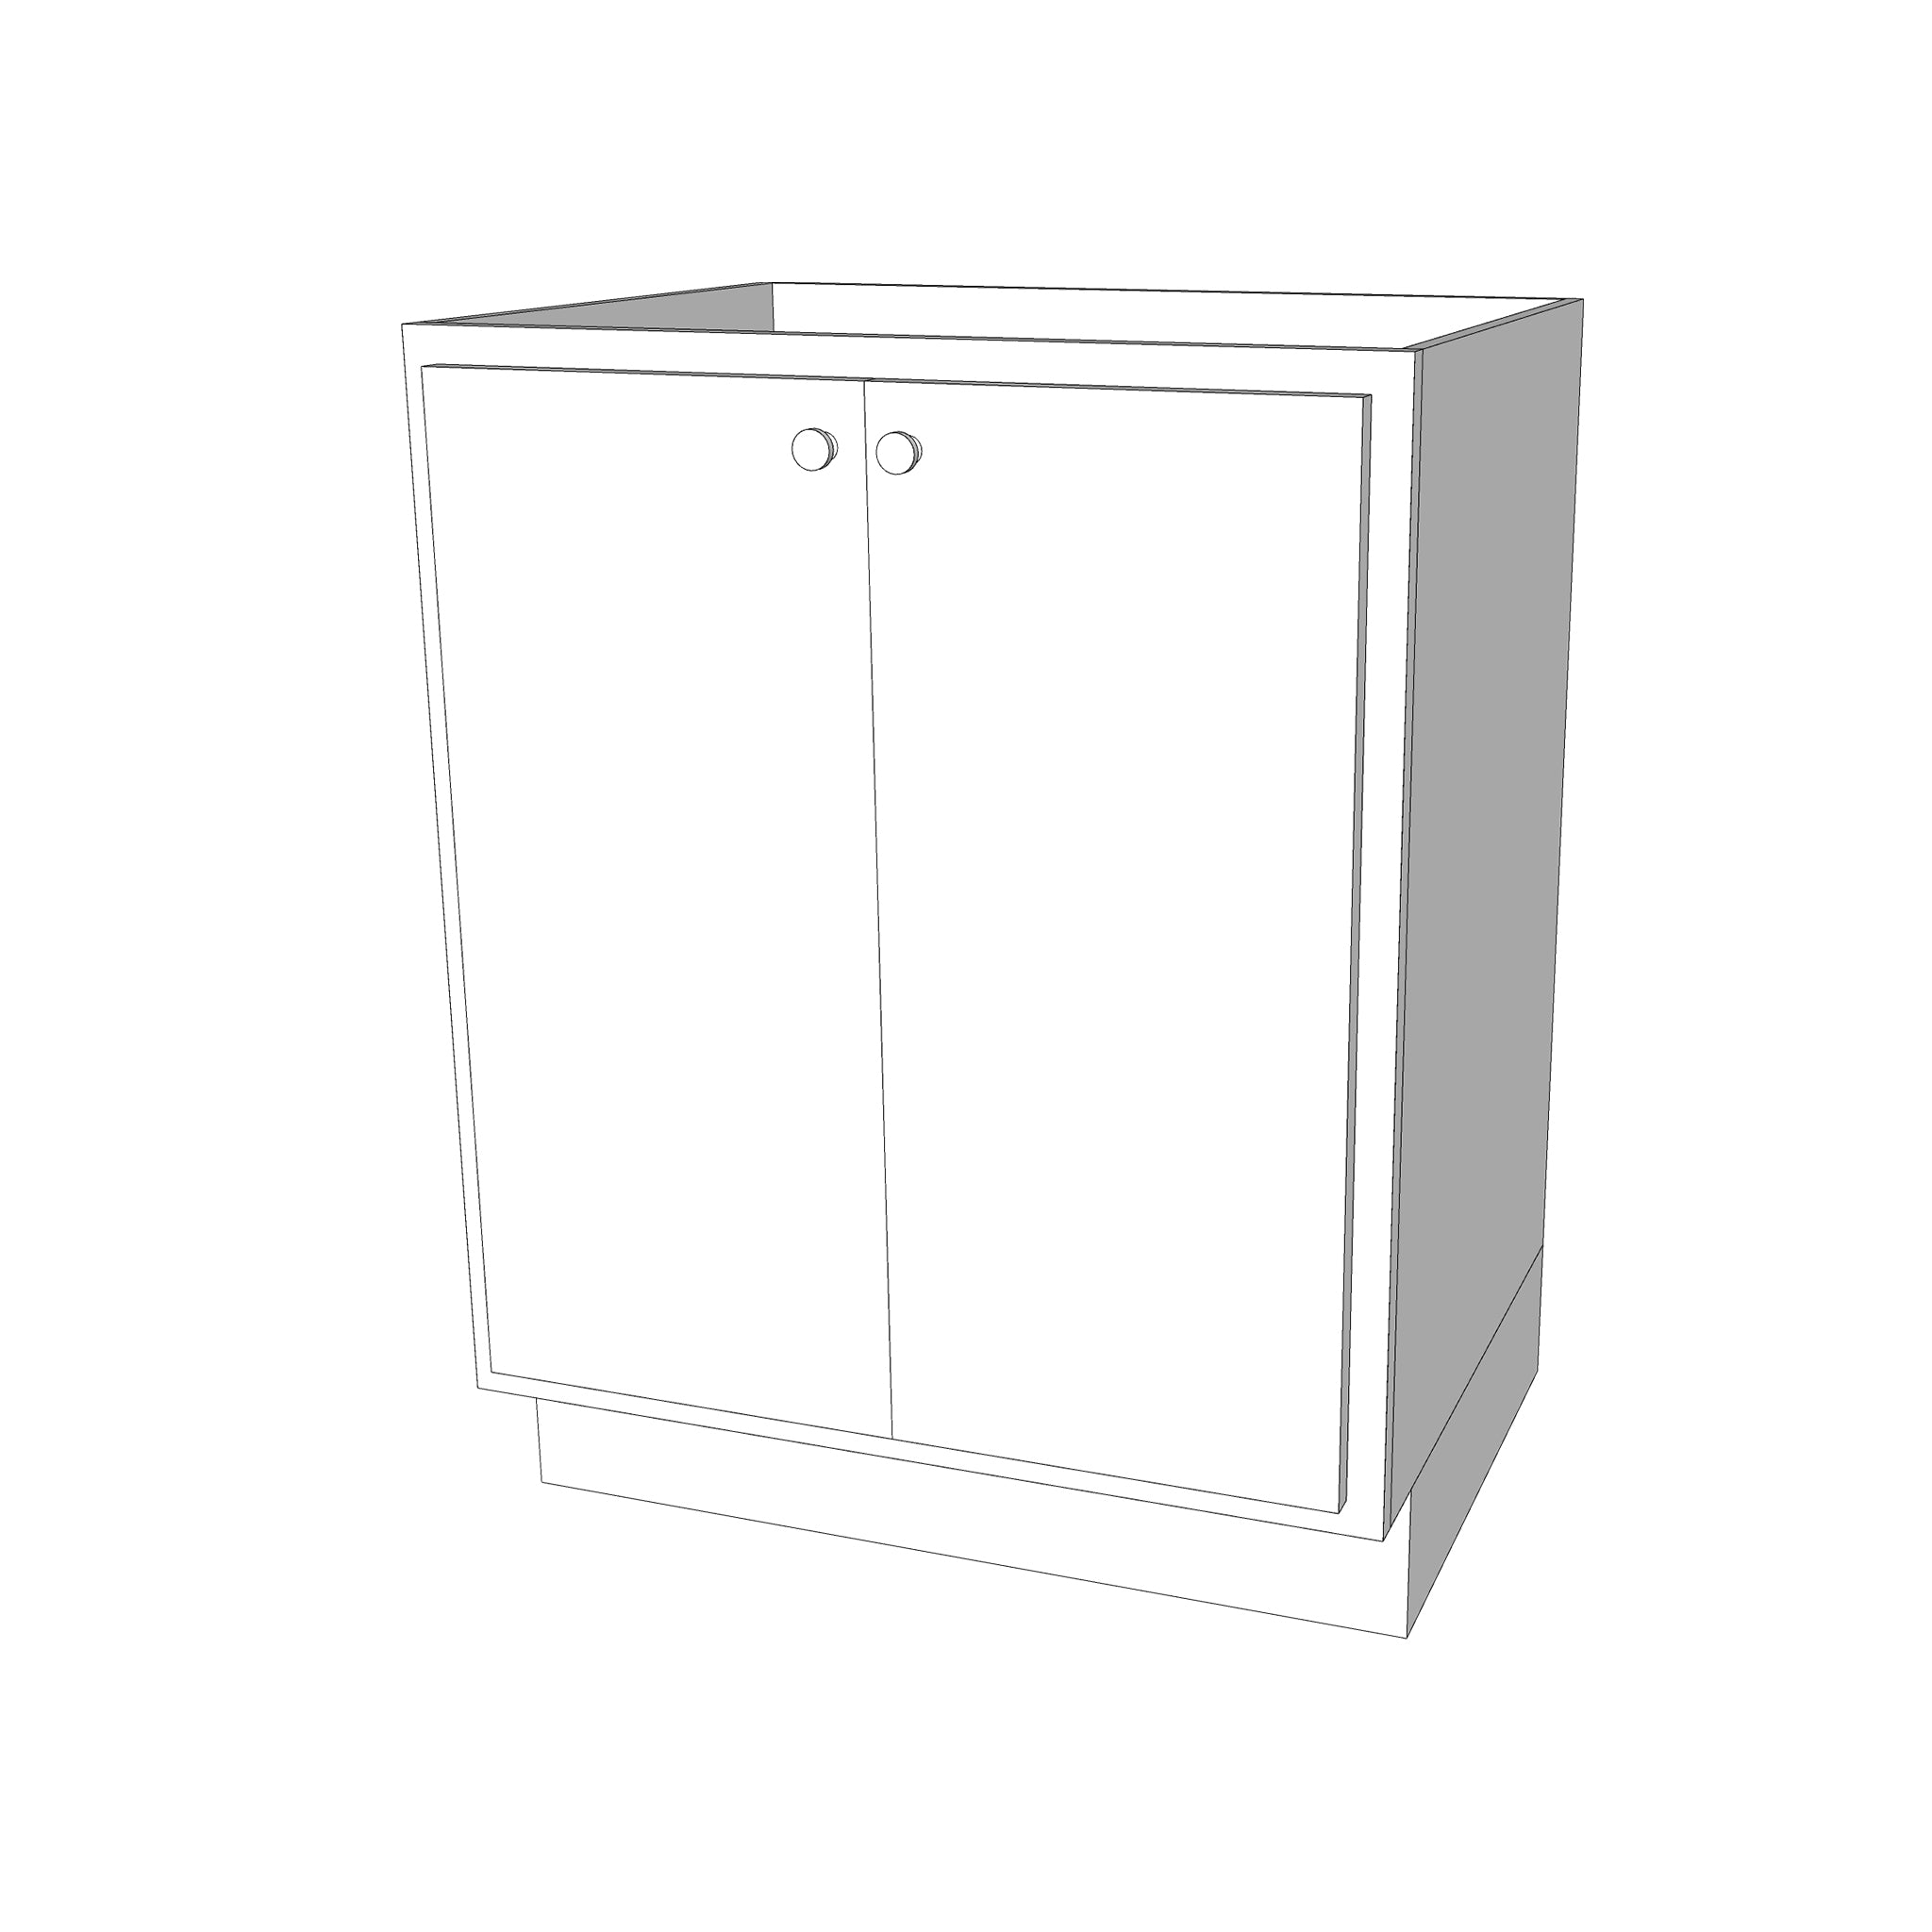 30x30 Full Height Vanity Base Cabinet - Assembled